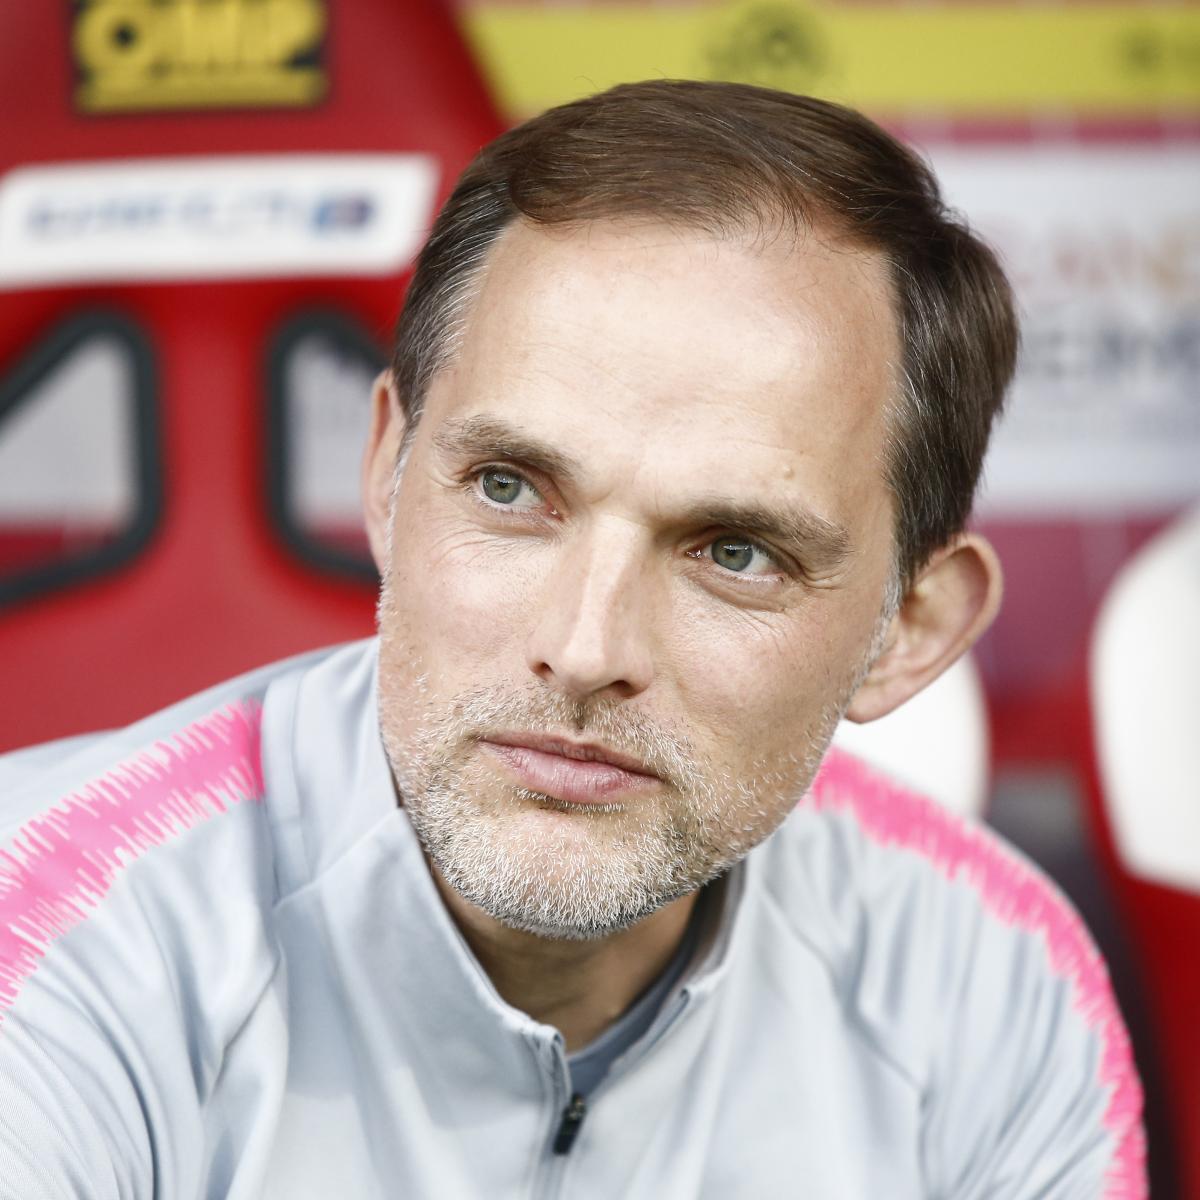 Psg Thomas Tuchel Agree To Contract Extension After 2019 Ligue 1 Title